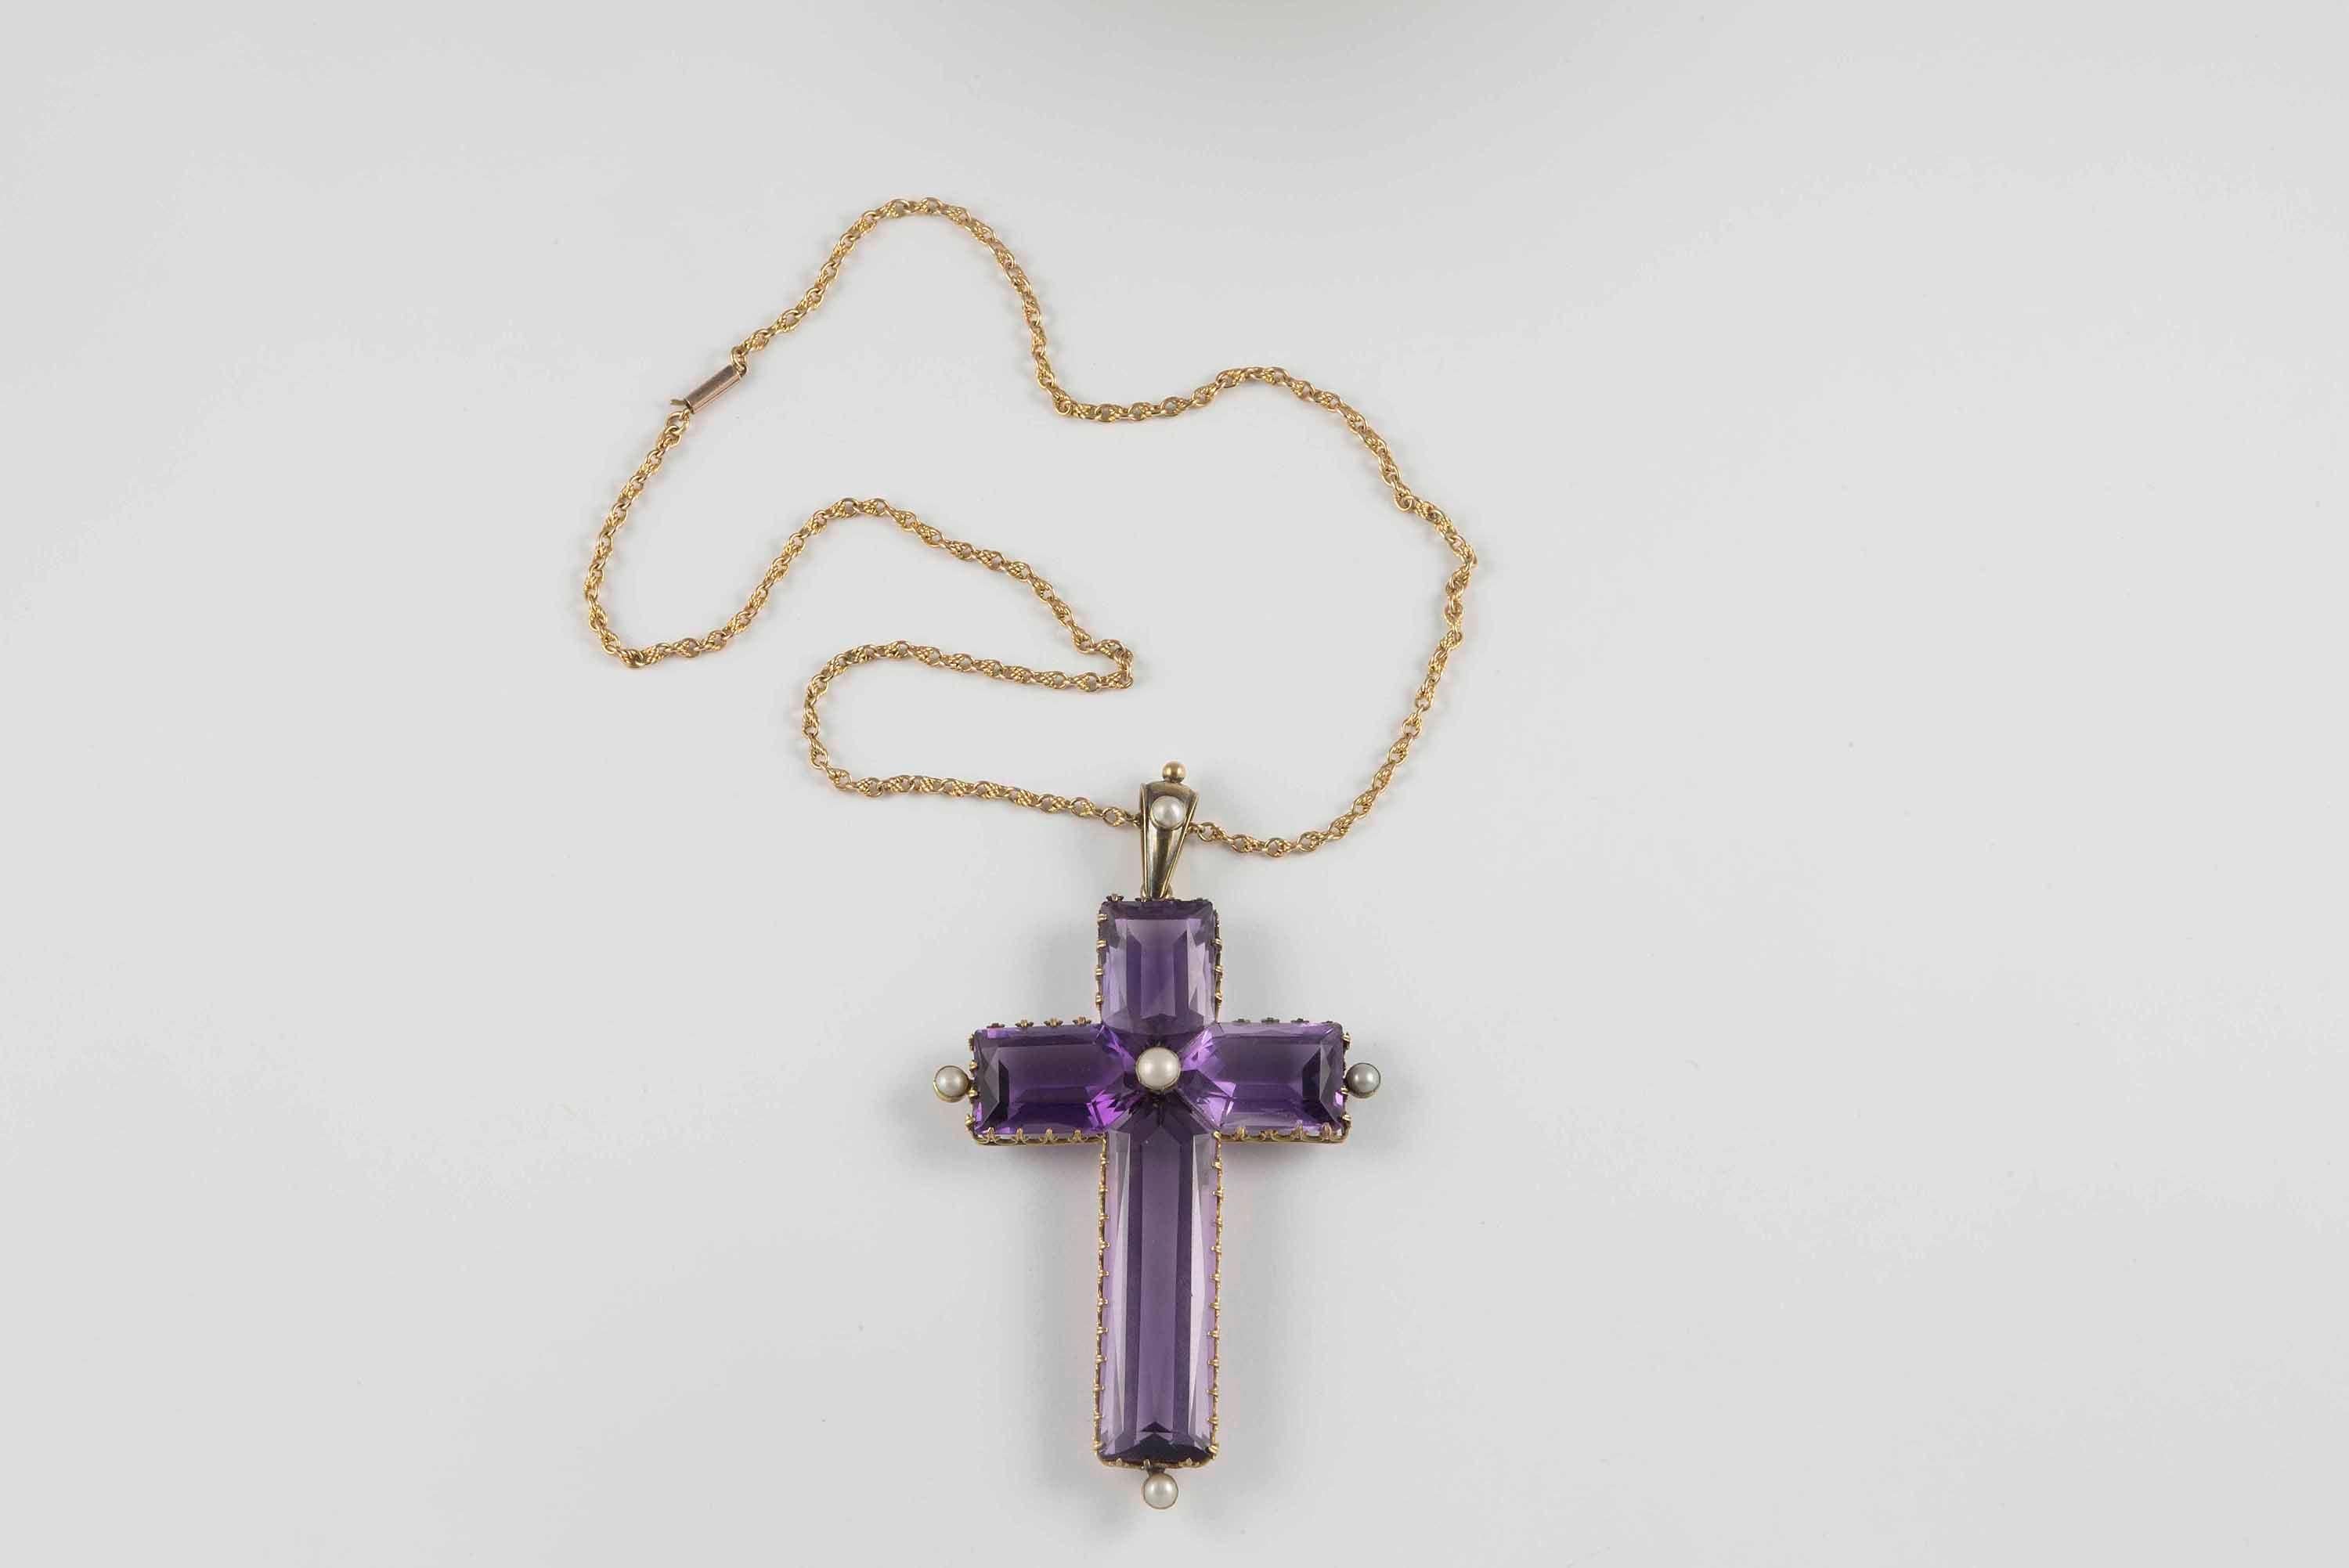 This large antique cross fashioned from 14kt yellow gold is set with a stunning natural fine purple amethyst weighing approximately 100 carats and accented with five seed pearls. The amethyst cross is bordered by delicate handcrafted gold piercing.

